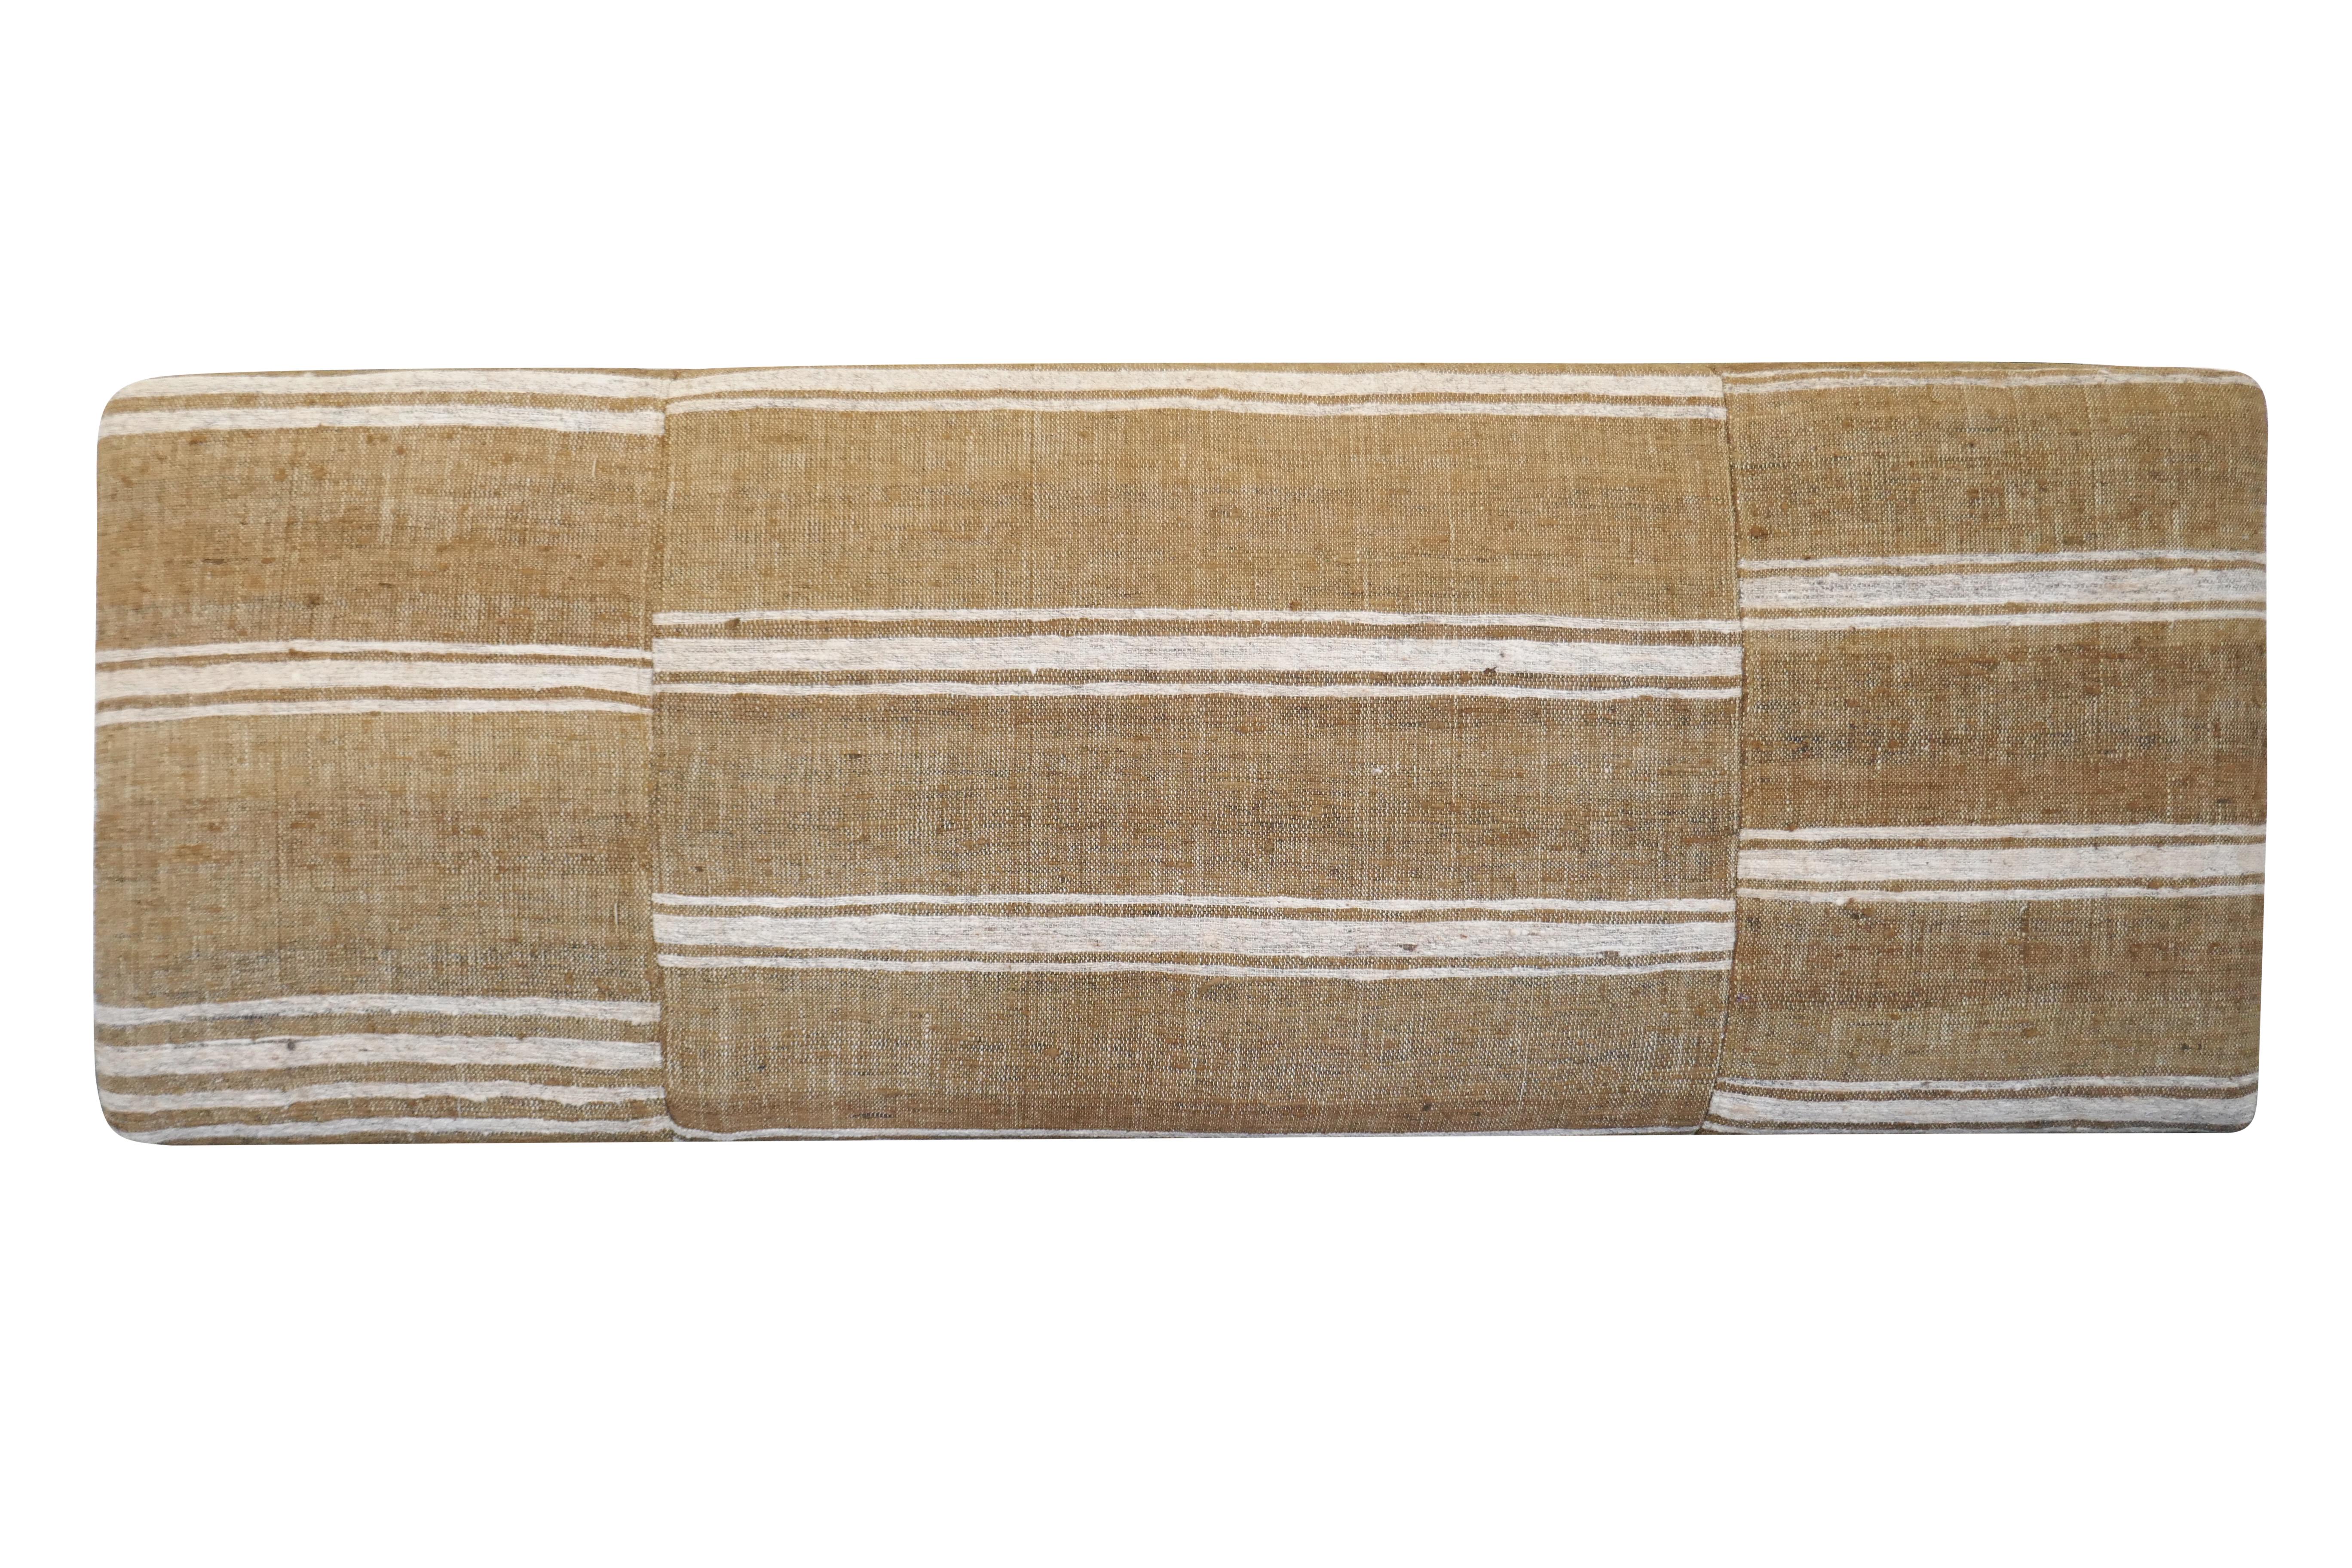 One-of-a-Kind!
FI custom large cocktail style ottoman. Perfectly upholstered in outstanding authentic vintage hand-woven heavy textural Berber Kilim pure wool in fabulous variegated camel & natural tones. Featuring original offset striping, a